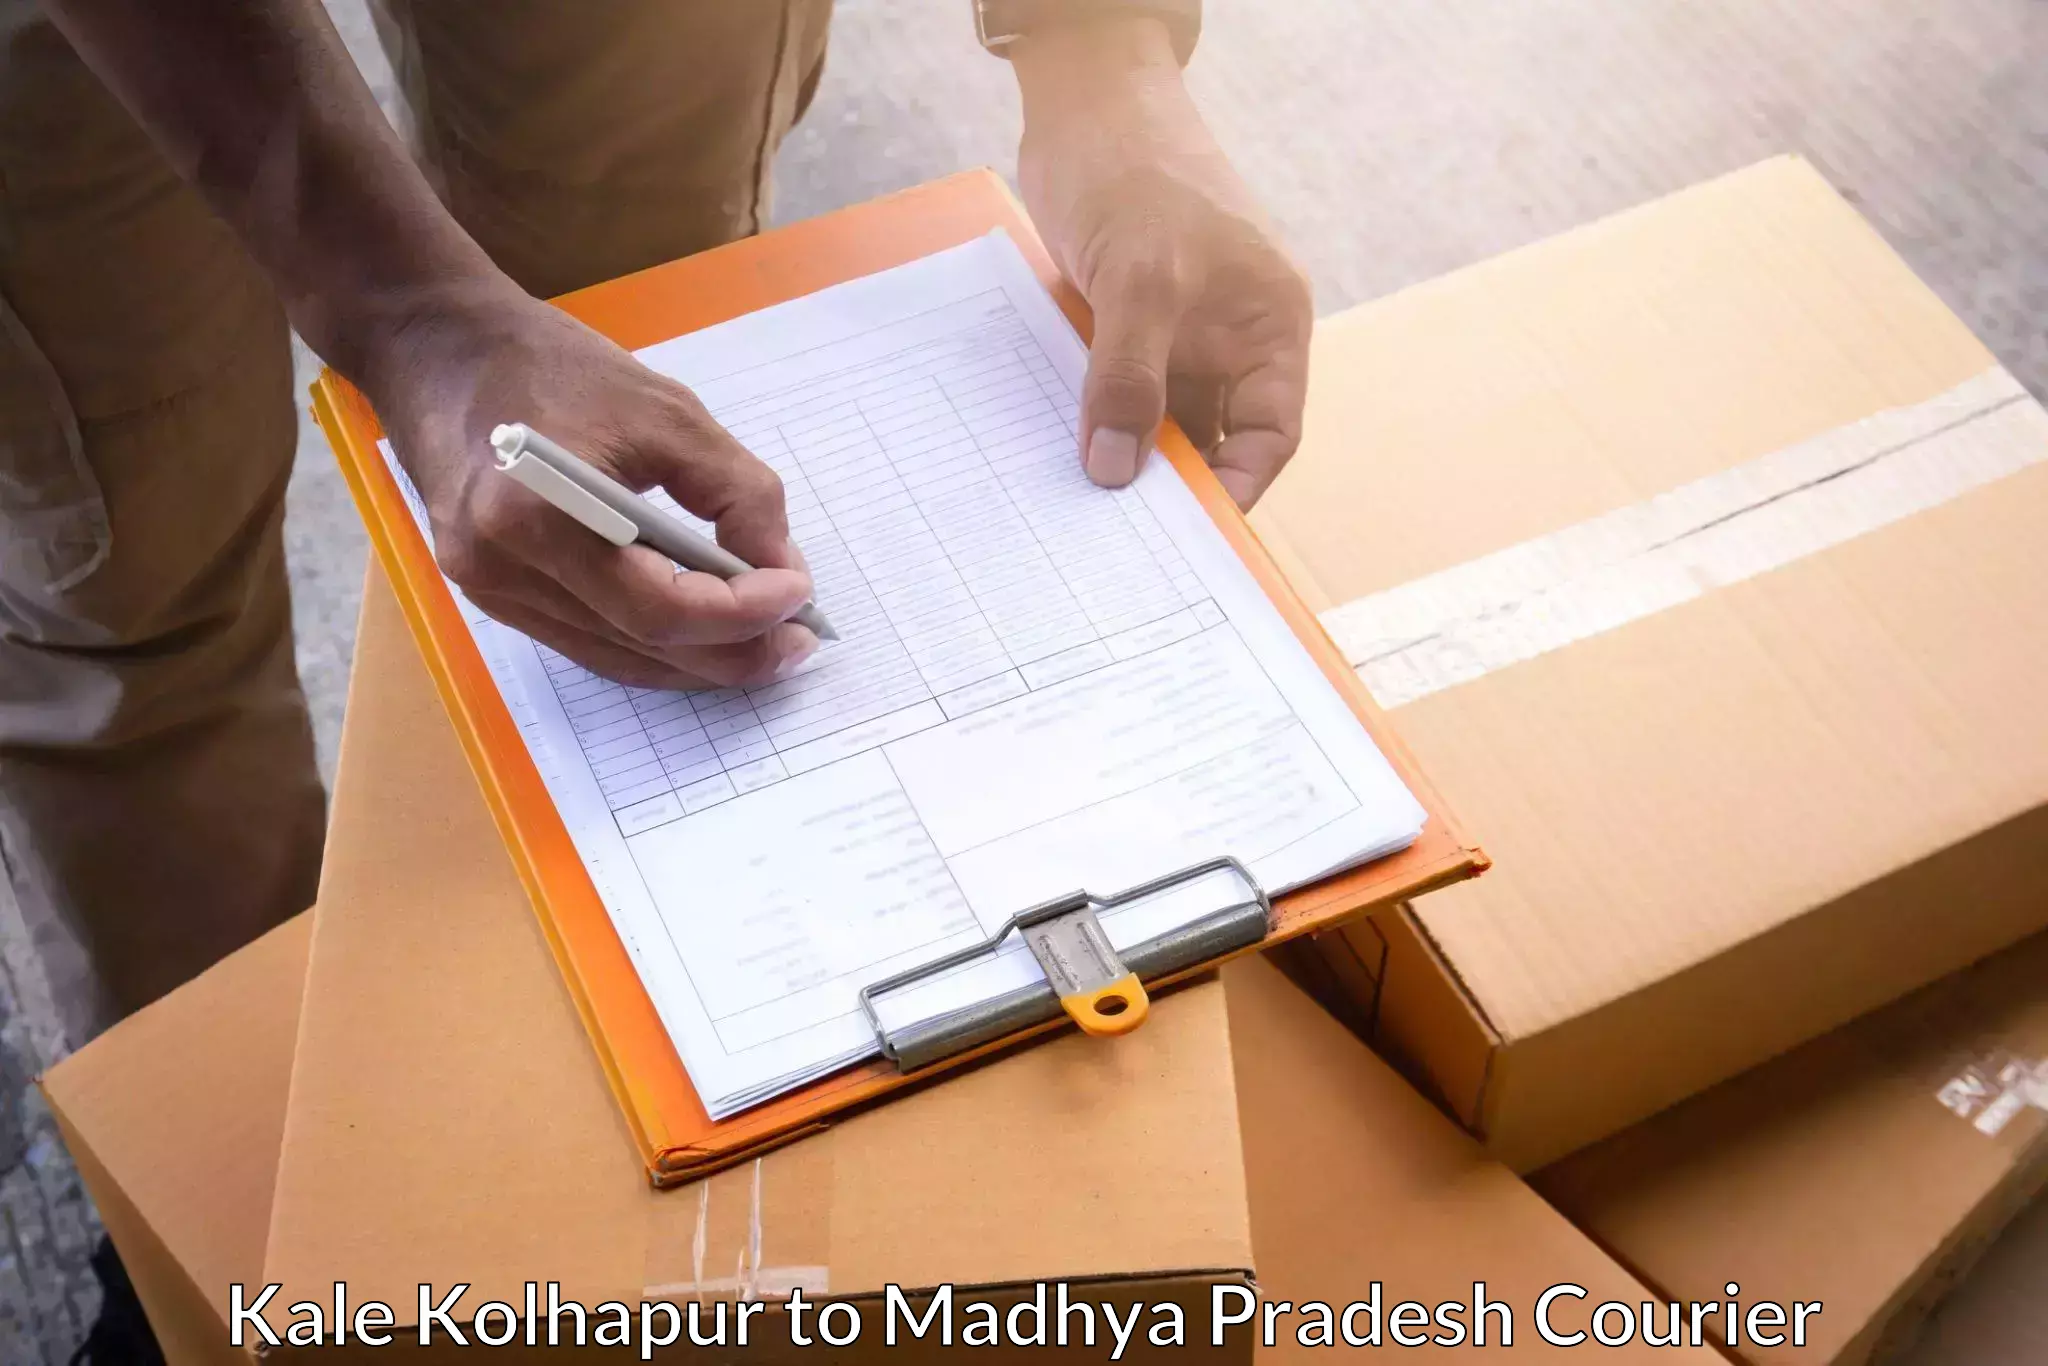 Express delivery network Kale Kolhapur to Madwas